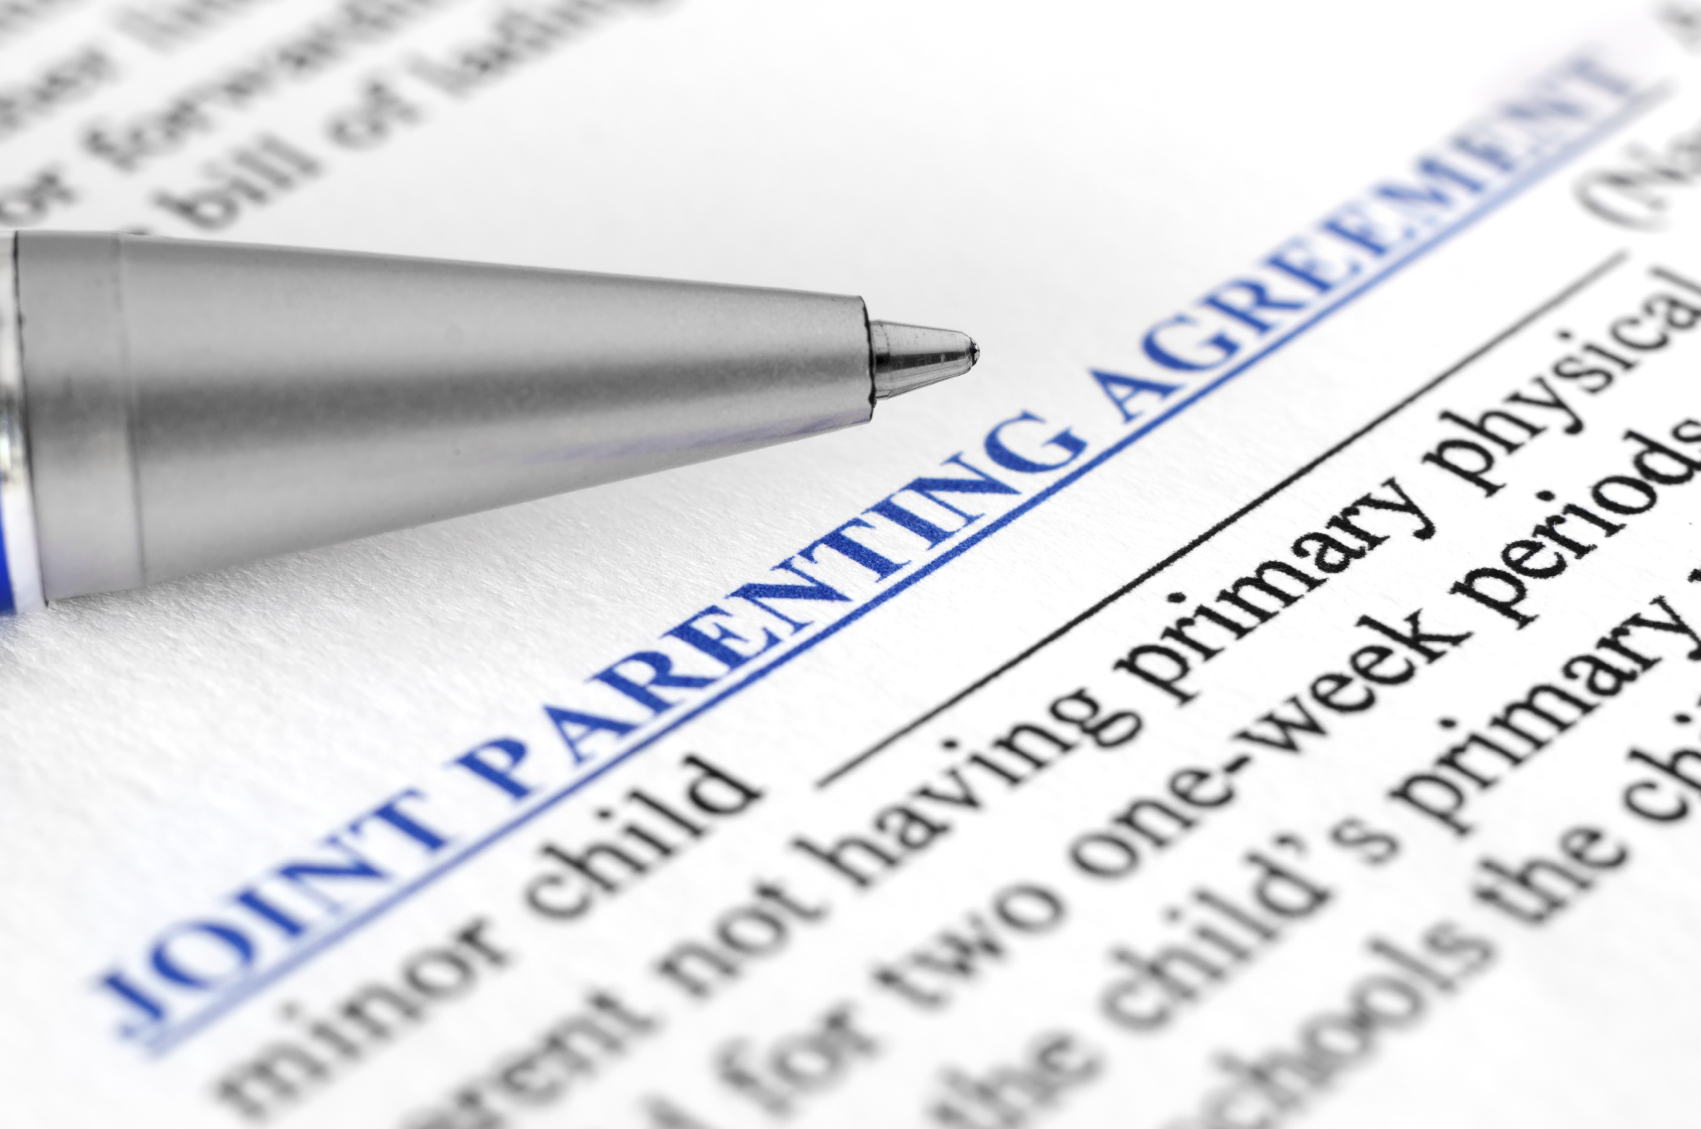 co-parenting agreement